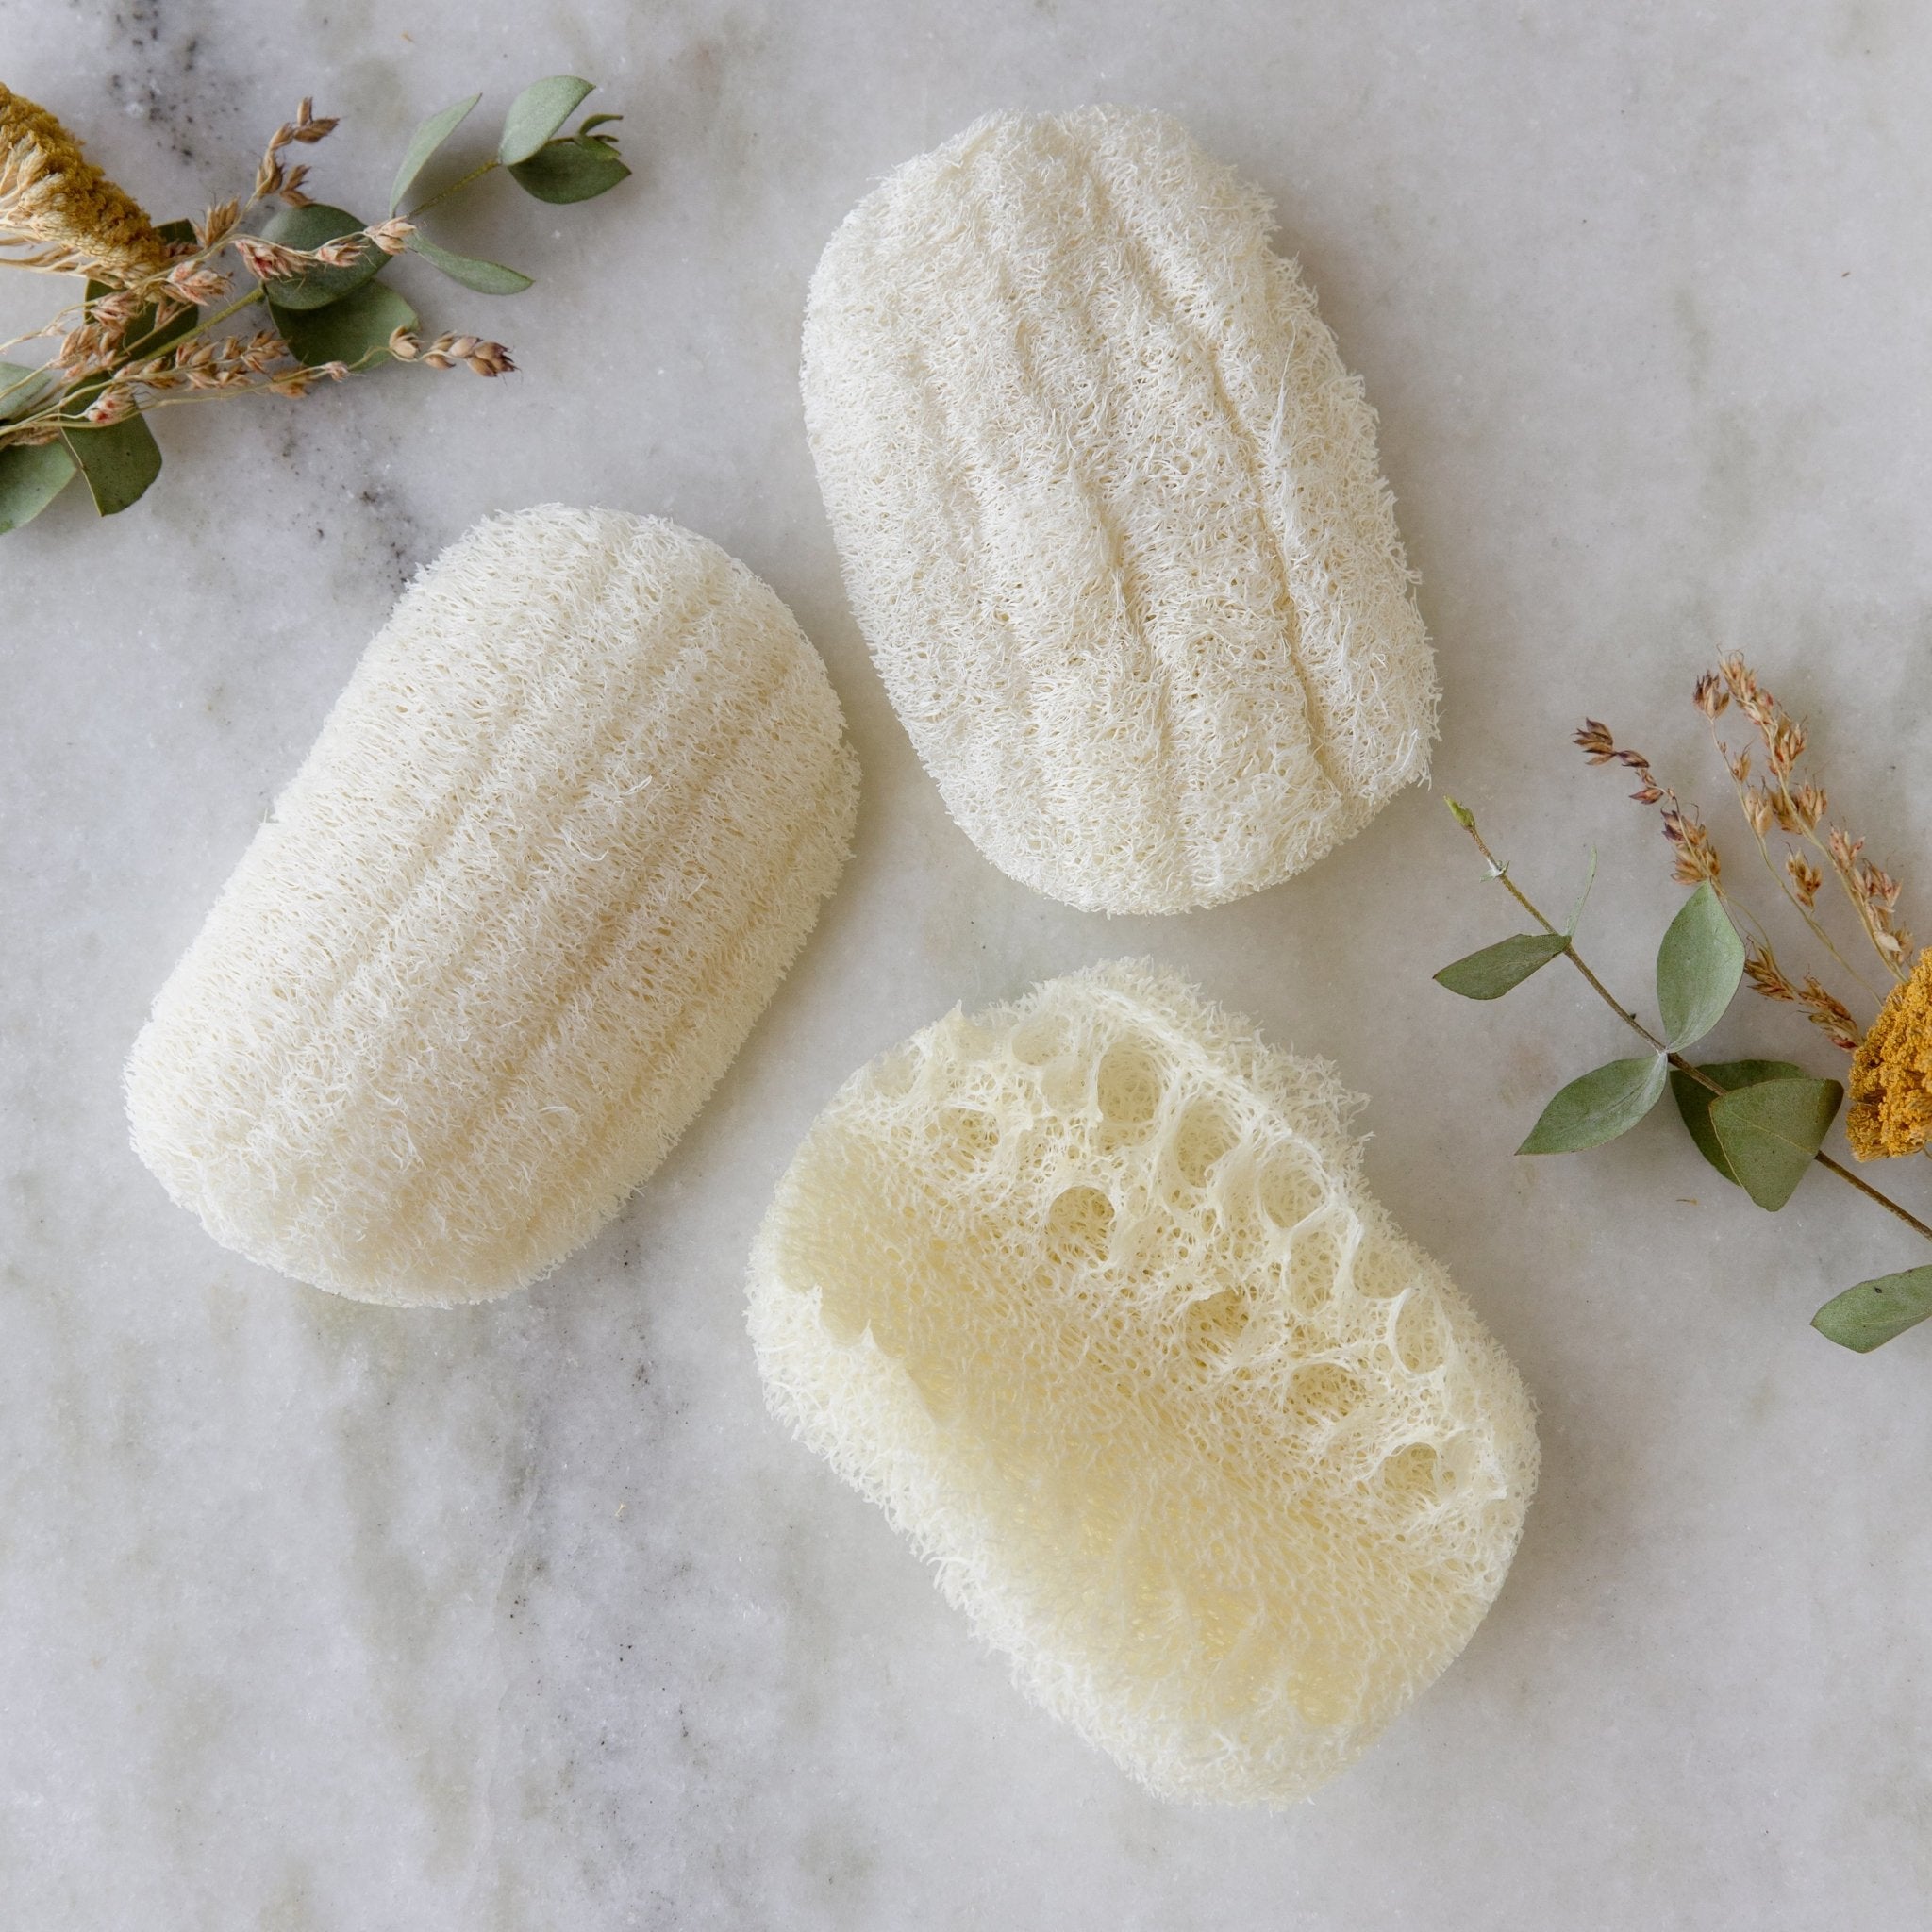 Eco Friendly Natural Dish Sponges - 4 Pack – BeWea - Together For Better  Weather